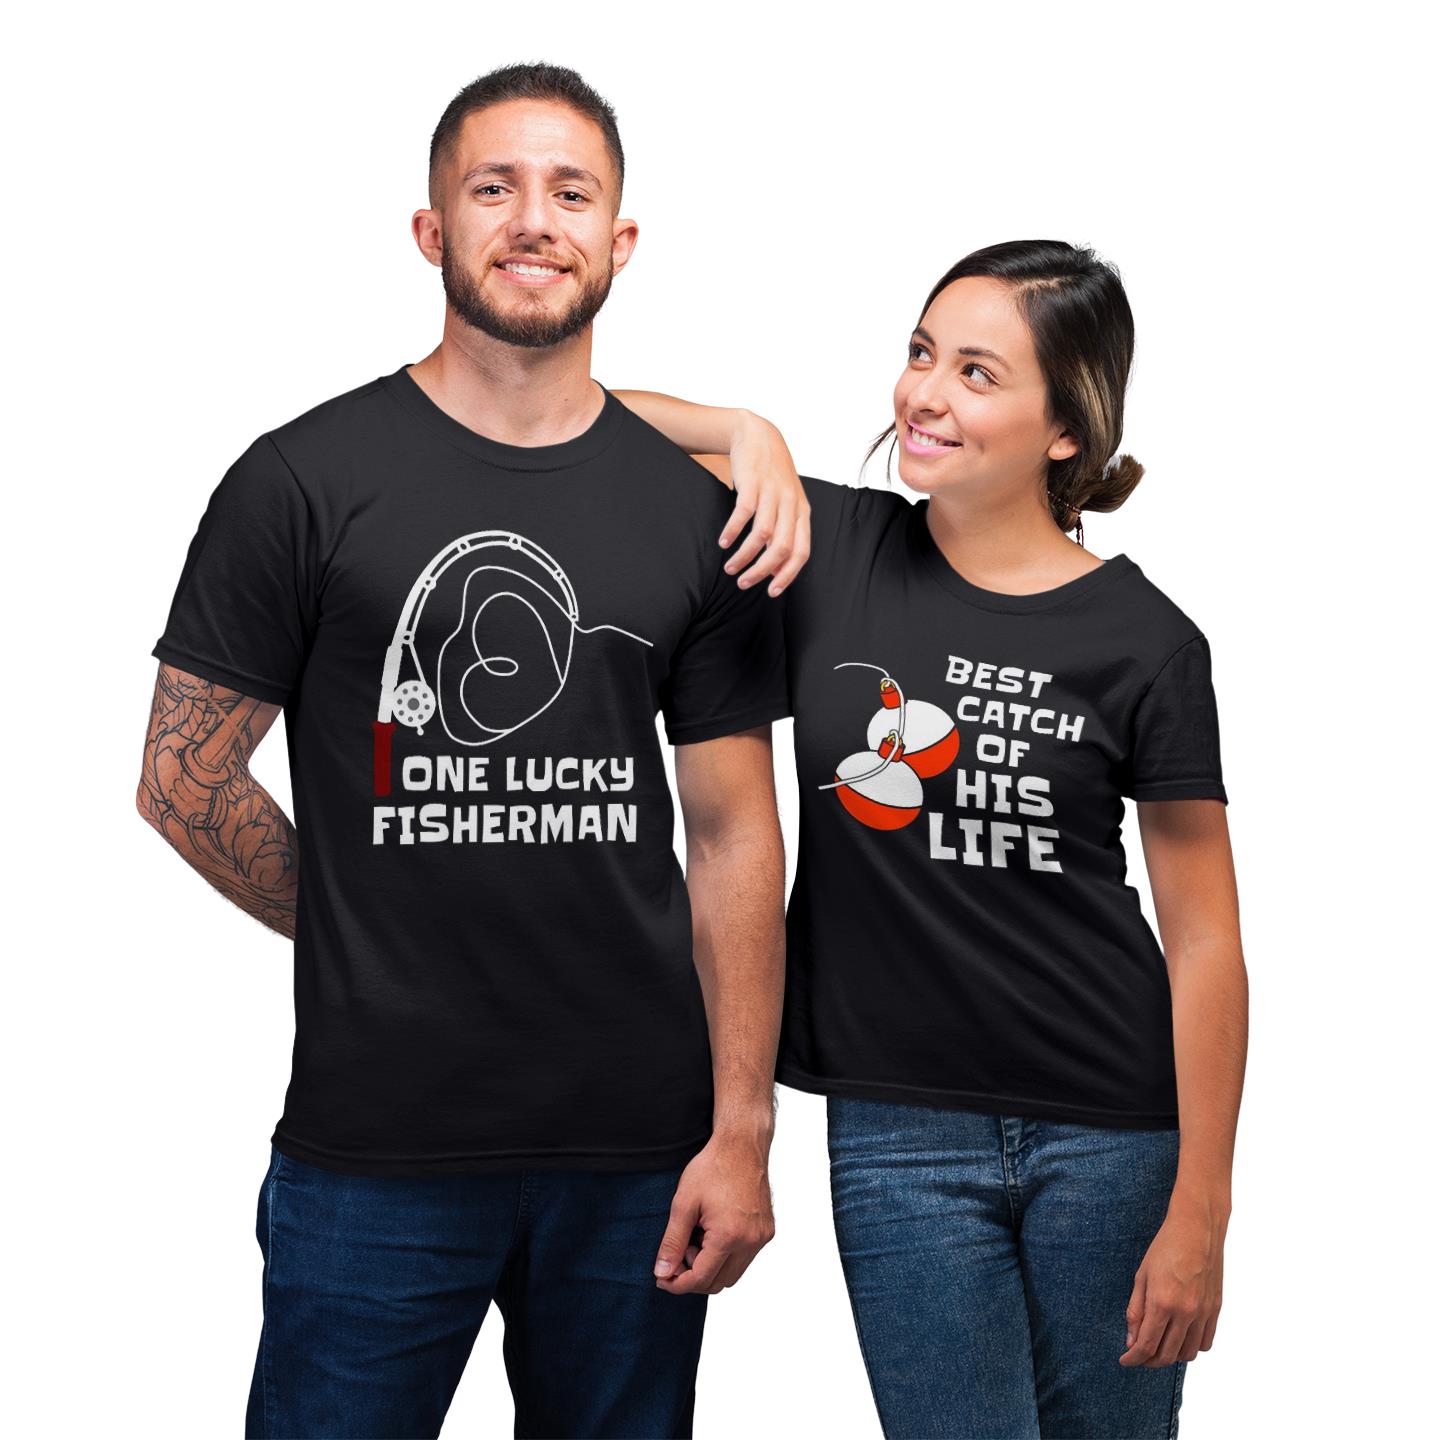 Matching Gift For Fishing Couple One Lucky Fisherman Best Catch Of His Life T-shirt